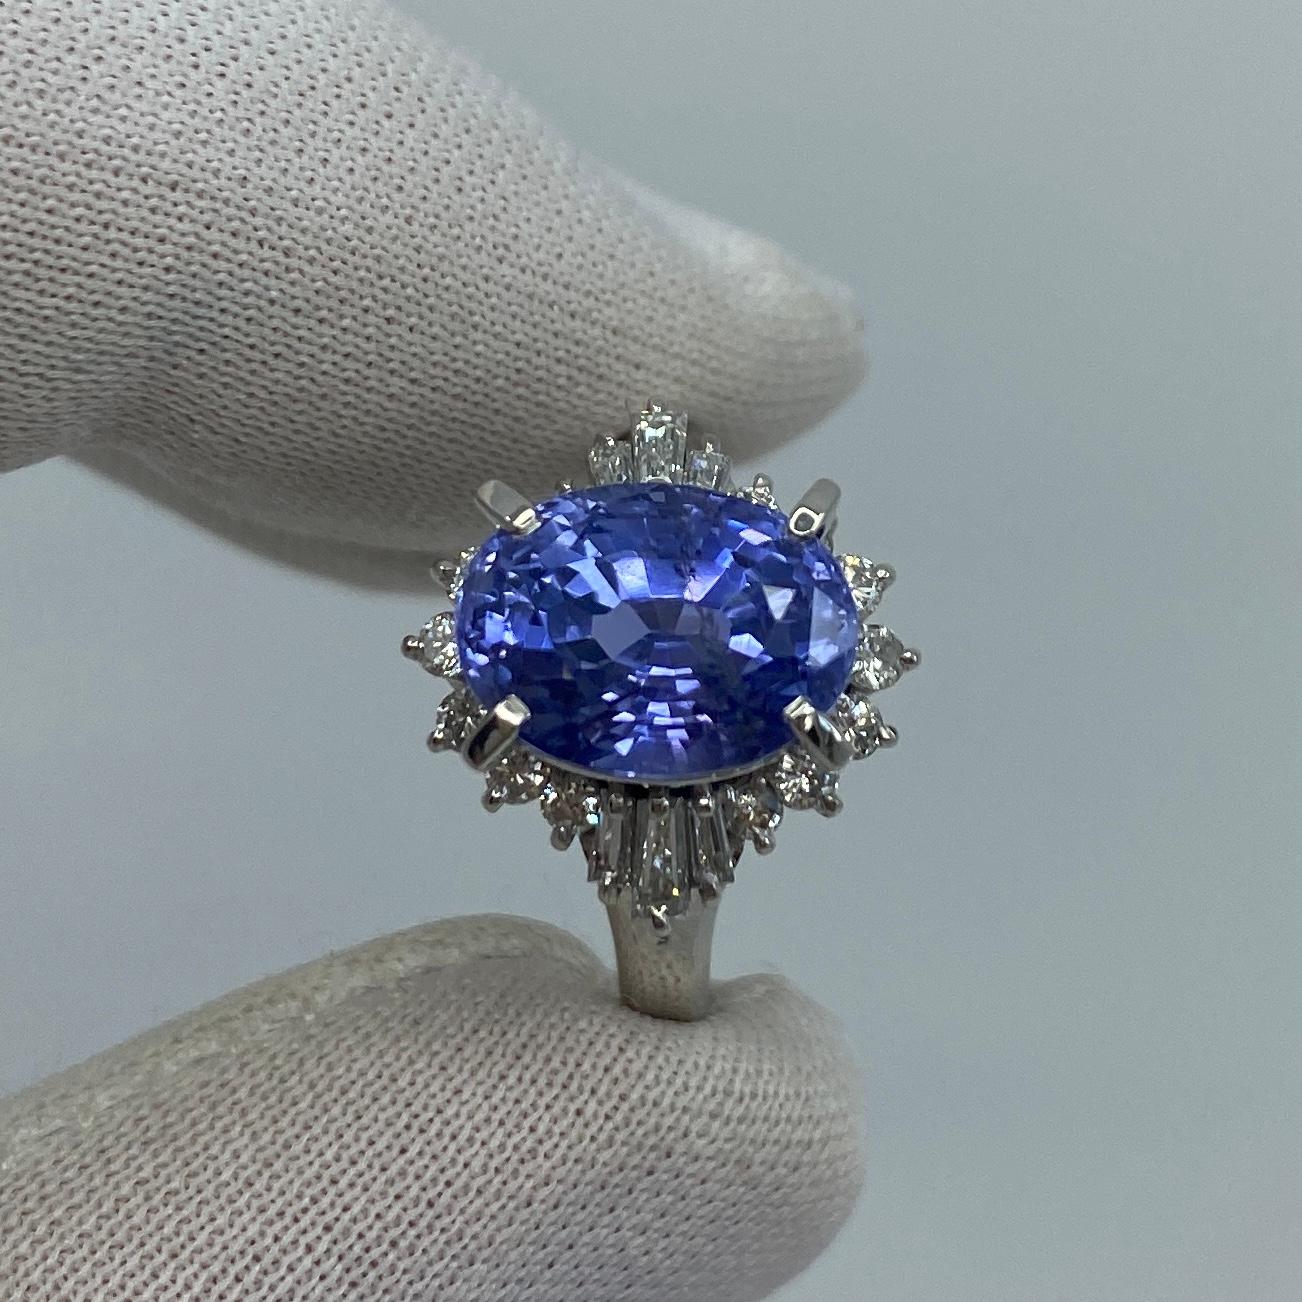 Women's GIA Certified 7.08 Carat Untreated Color Change Sapphire & Diamond Cocktail Ring